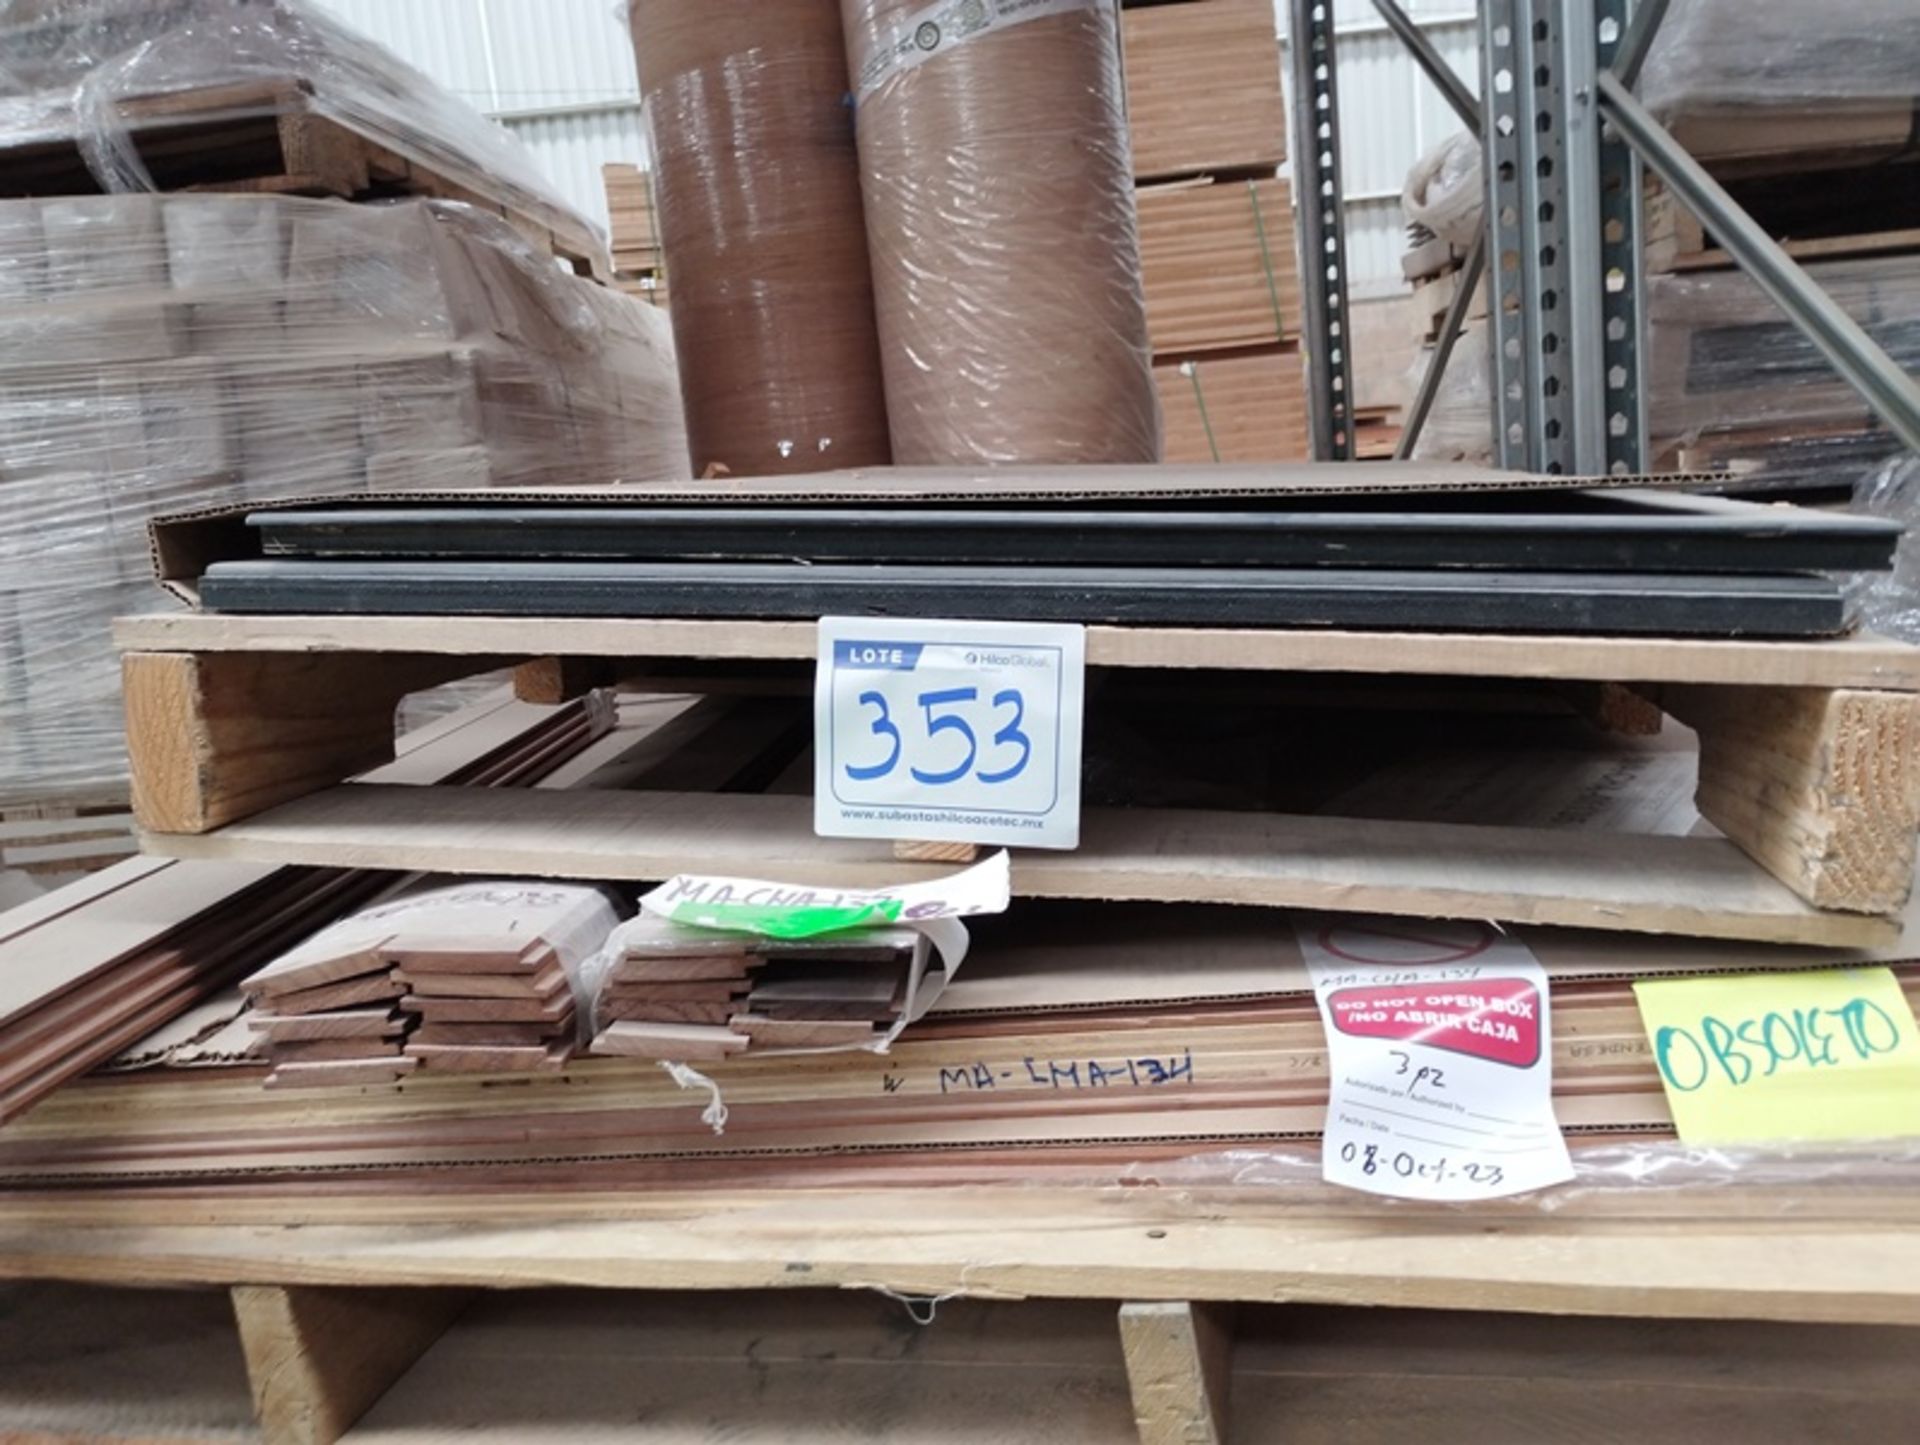 LOT OF (4,667) PCS OF ALUMINUM SHEET AND WOOD BOARDS - Image 15 of 22